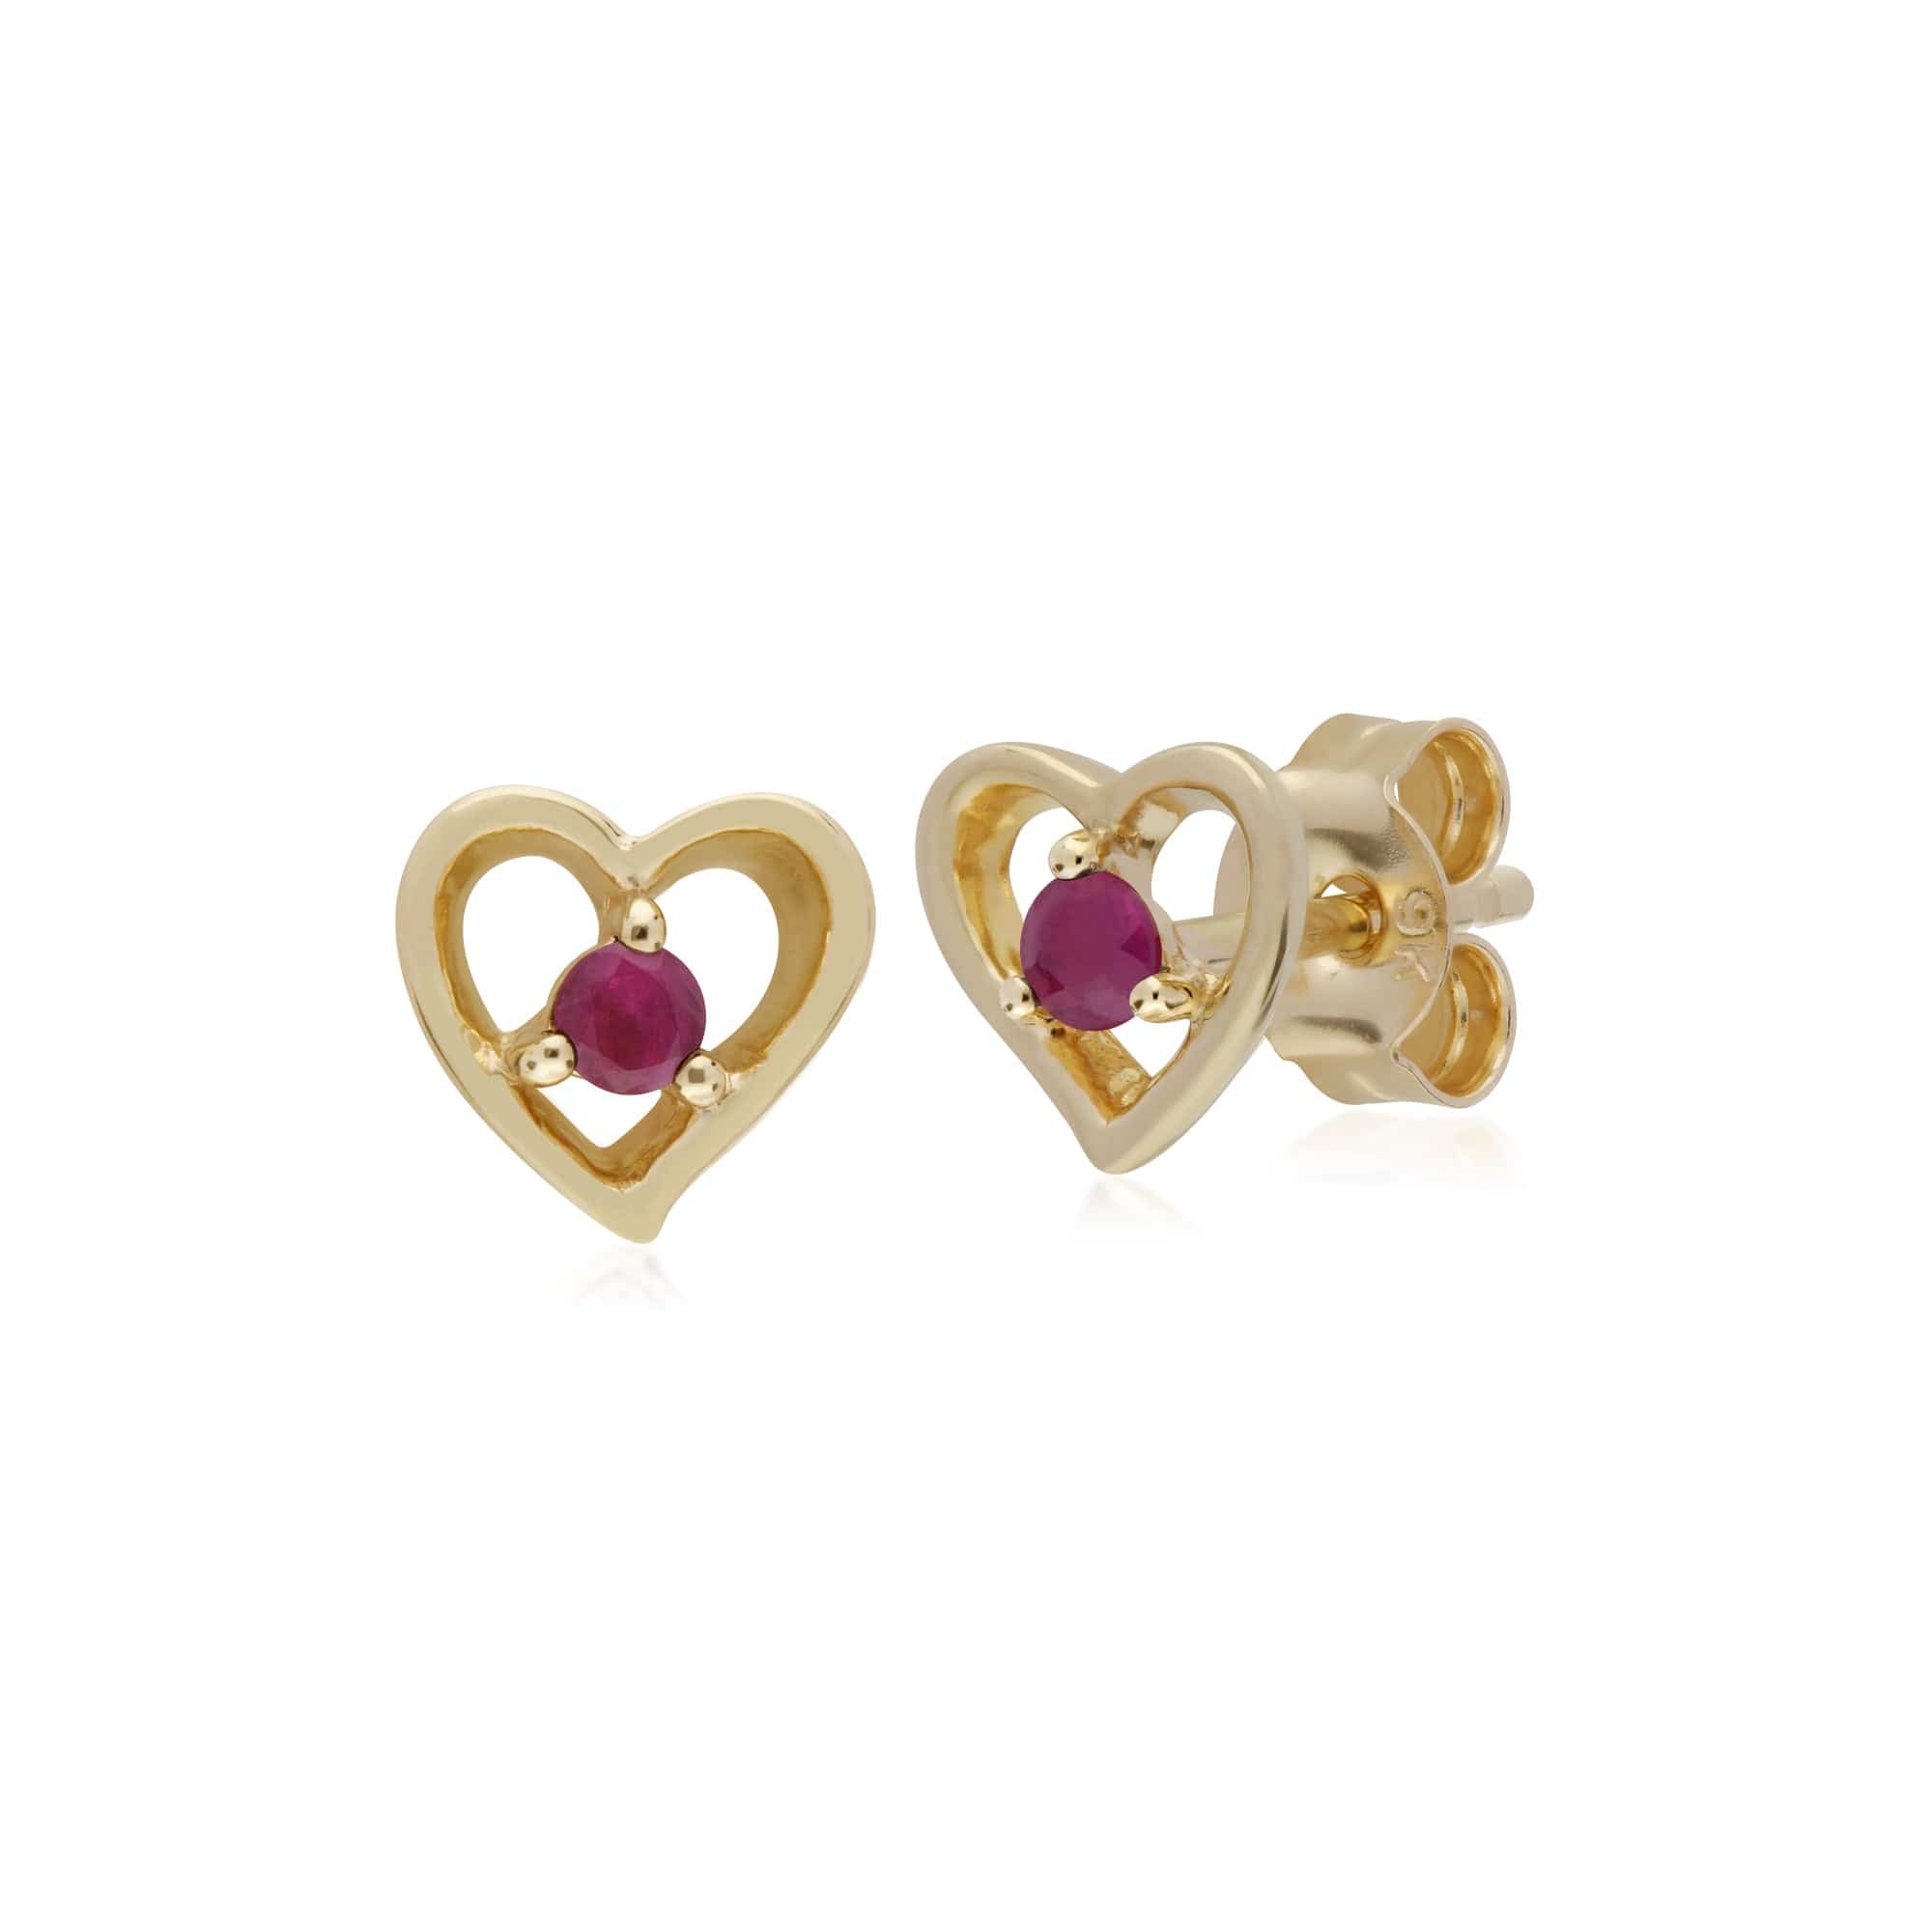 135E1521029-135P1875099 Classic Round Ruby Single Stone Heart Stud Earrings & Necklace Set in 9ct Yellow Gold 2